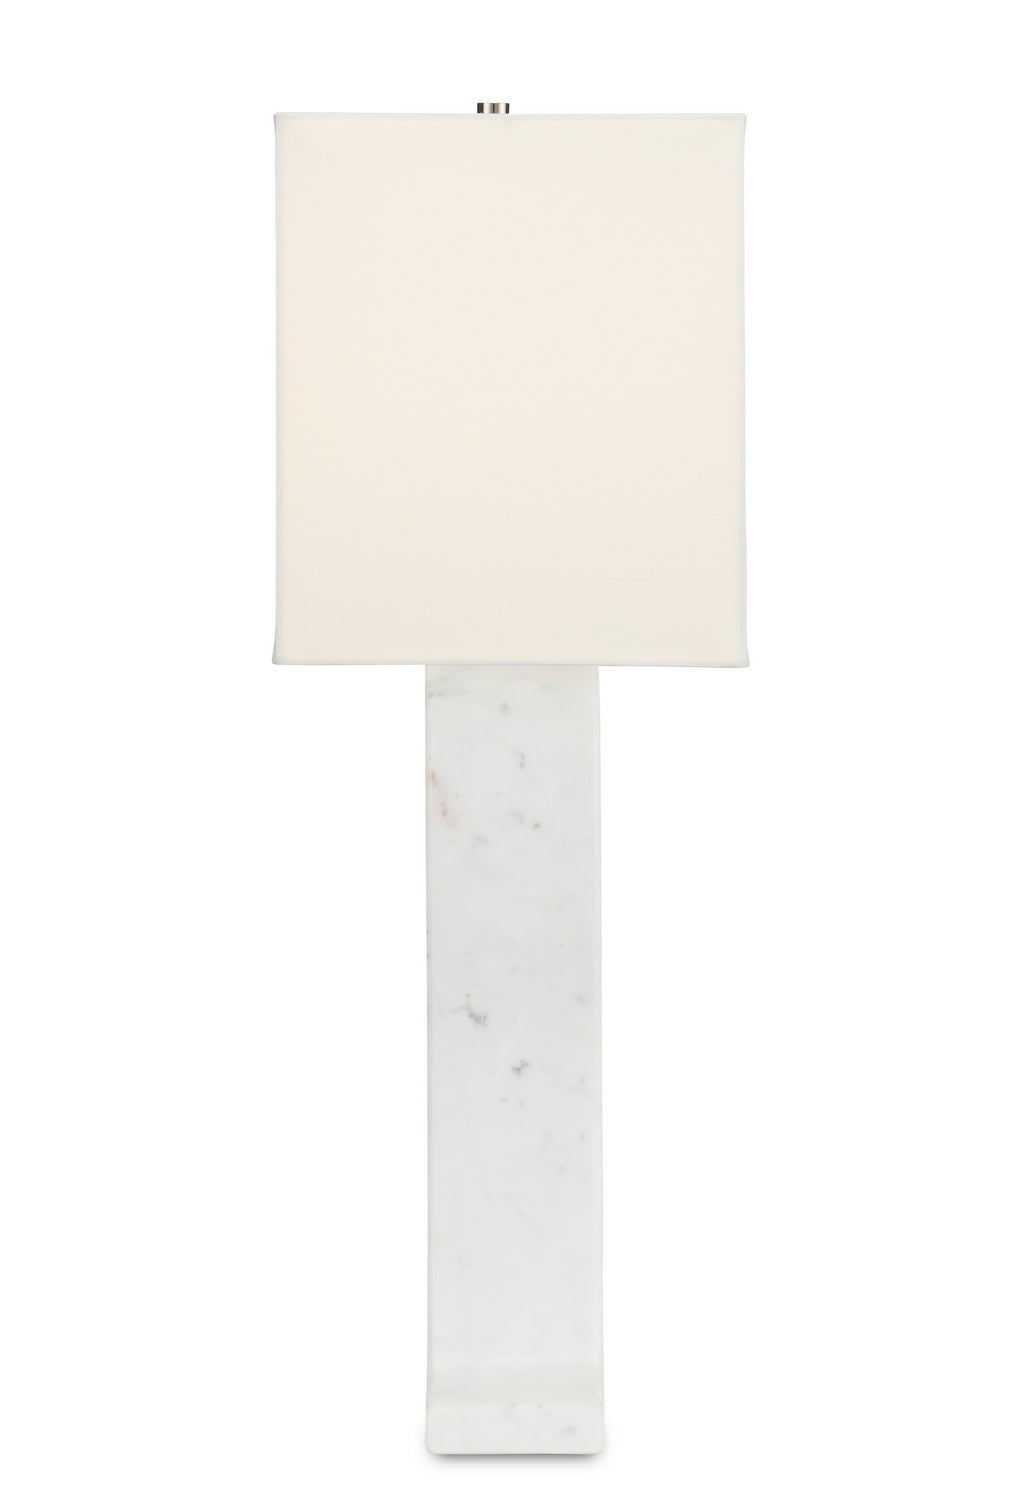 Currey and Company - 6000-0776 - One Light Table Lamp - Leo - Natural